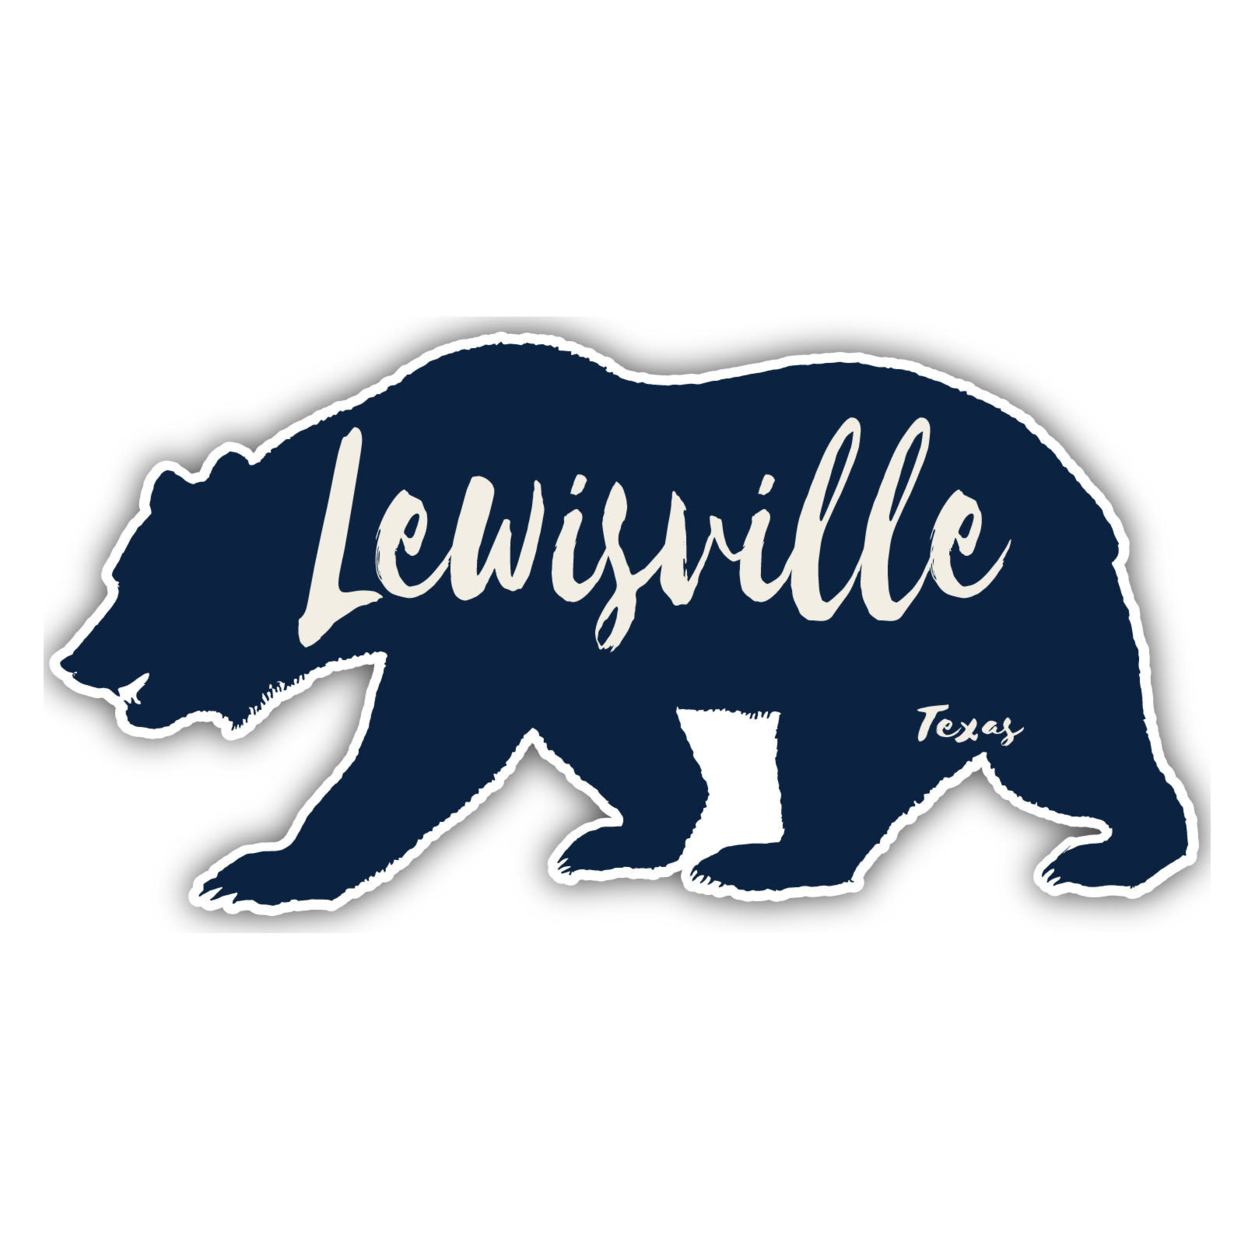 Lewisville Texas Souvenir Decorative Stickers (Choose Theme And Size) - 4-Inch, Bear